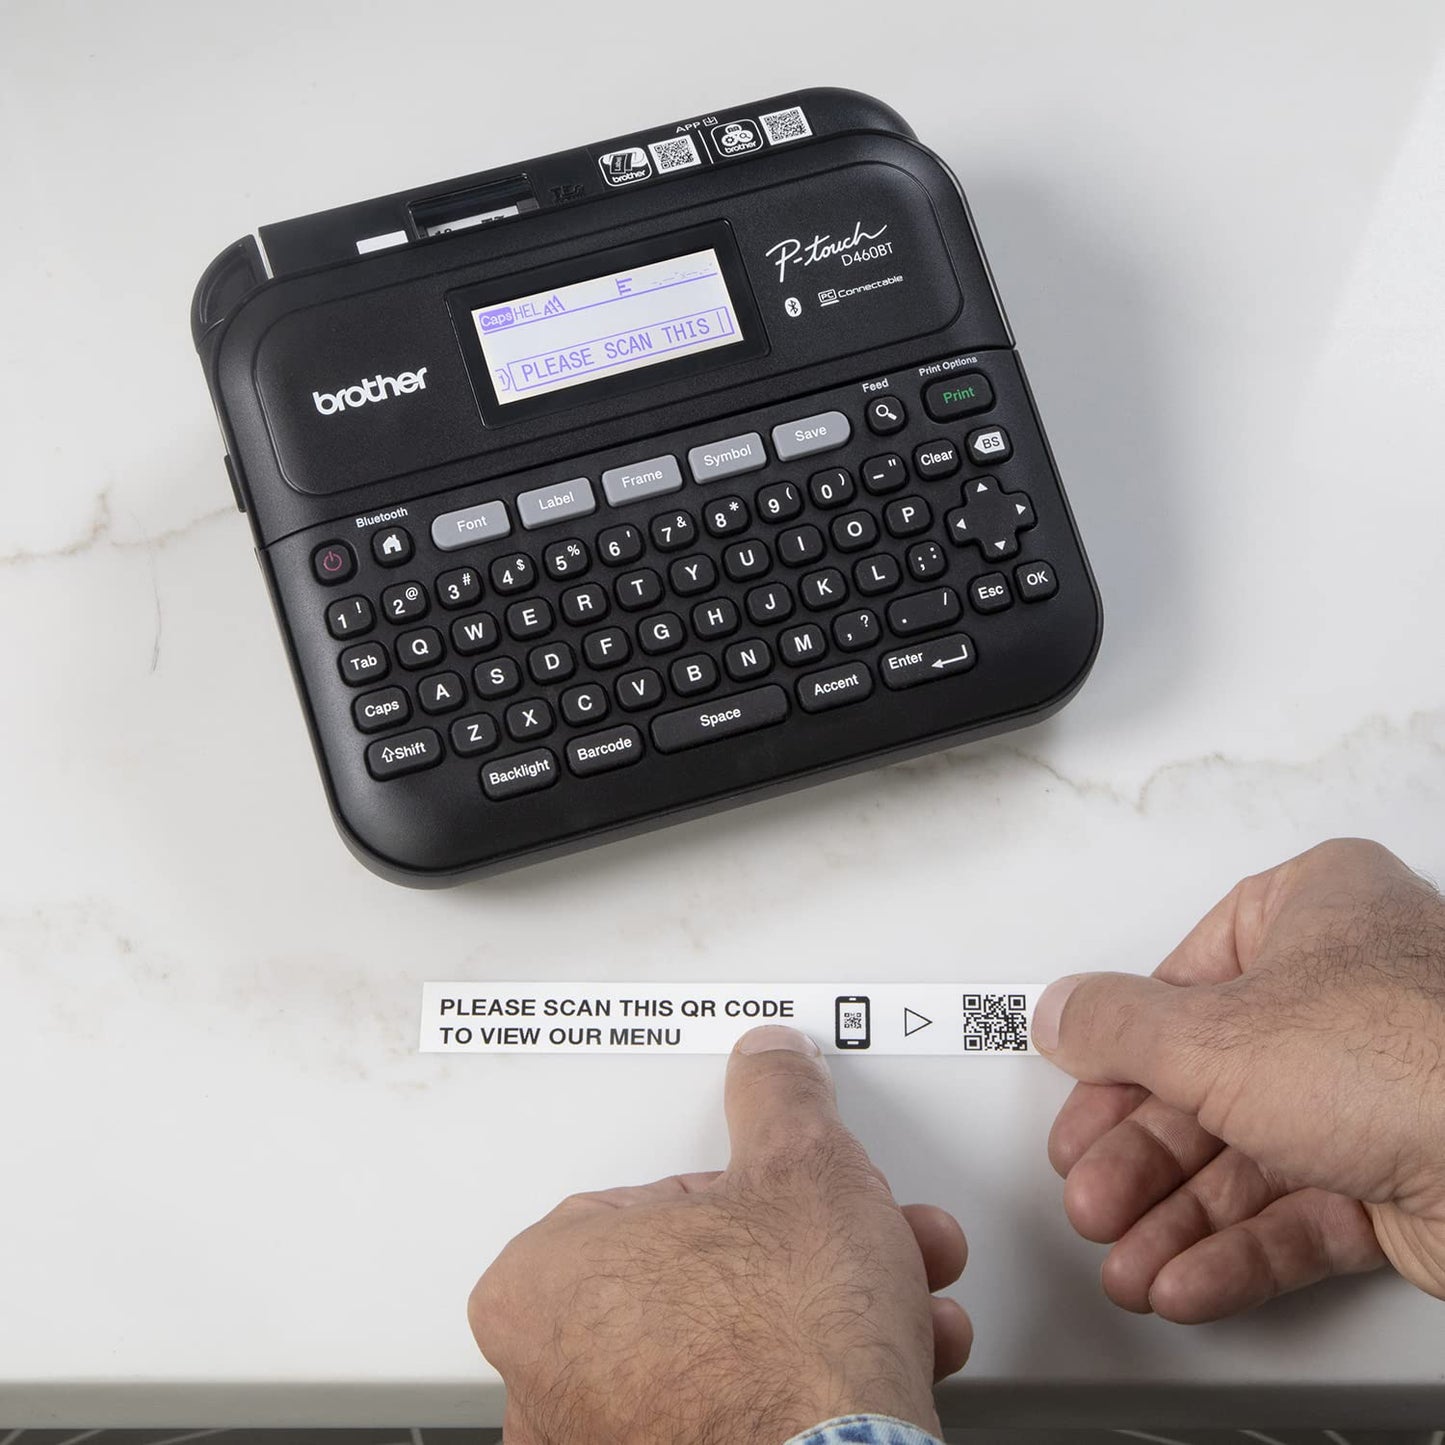 Brother P-Touch PT-D410 Home/Office Advanced Label Maker | Connect via USB to Create and Print on TZe Label Tapes up to ~3/4 inch